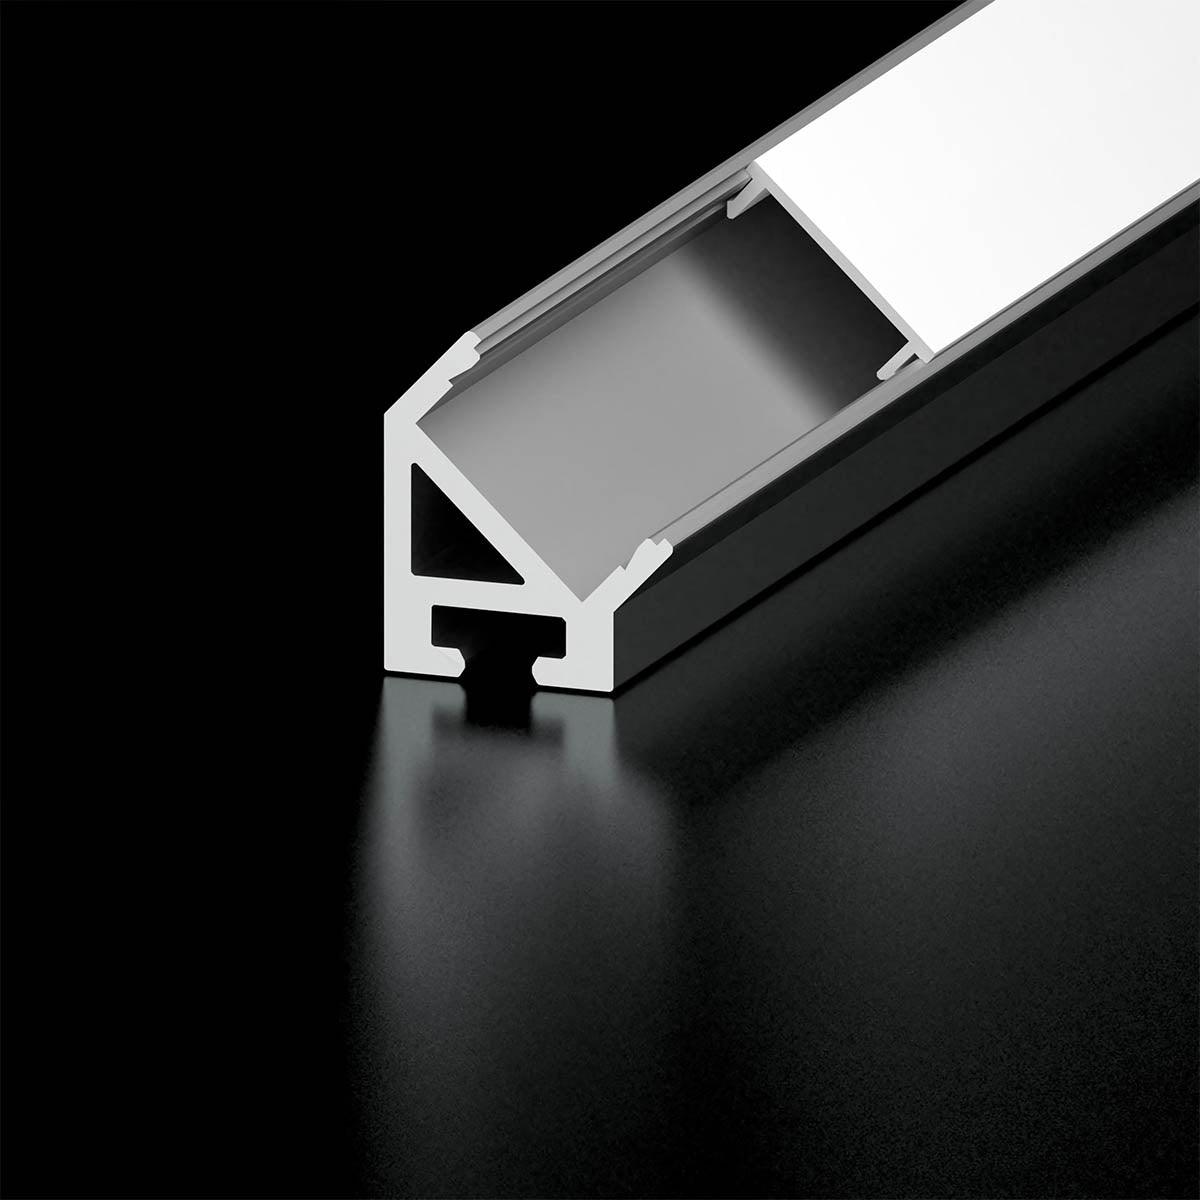 48in. Chromapath Builder, 45 degree LED channel, Corner, for Strips Up To 12mm, White - Bees Lighting